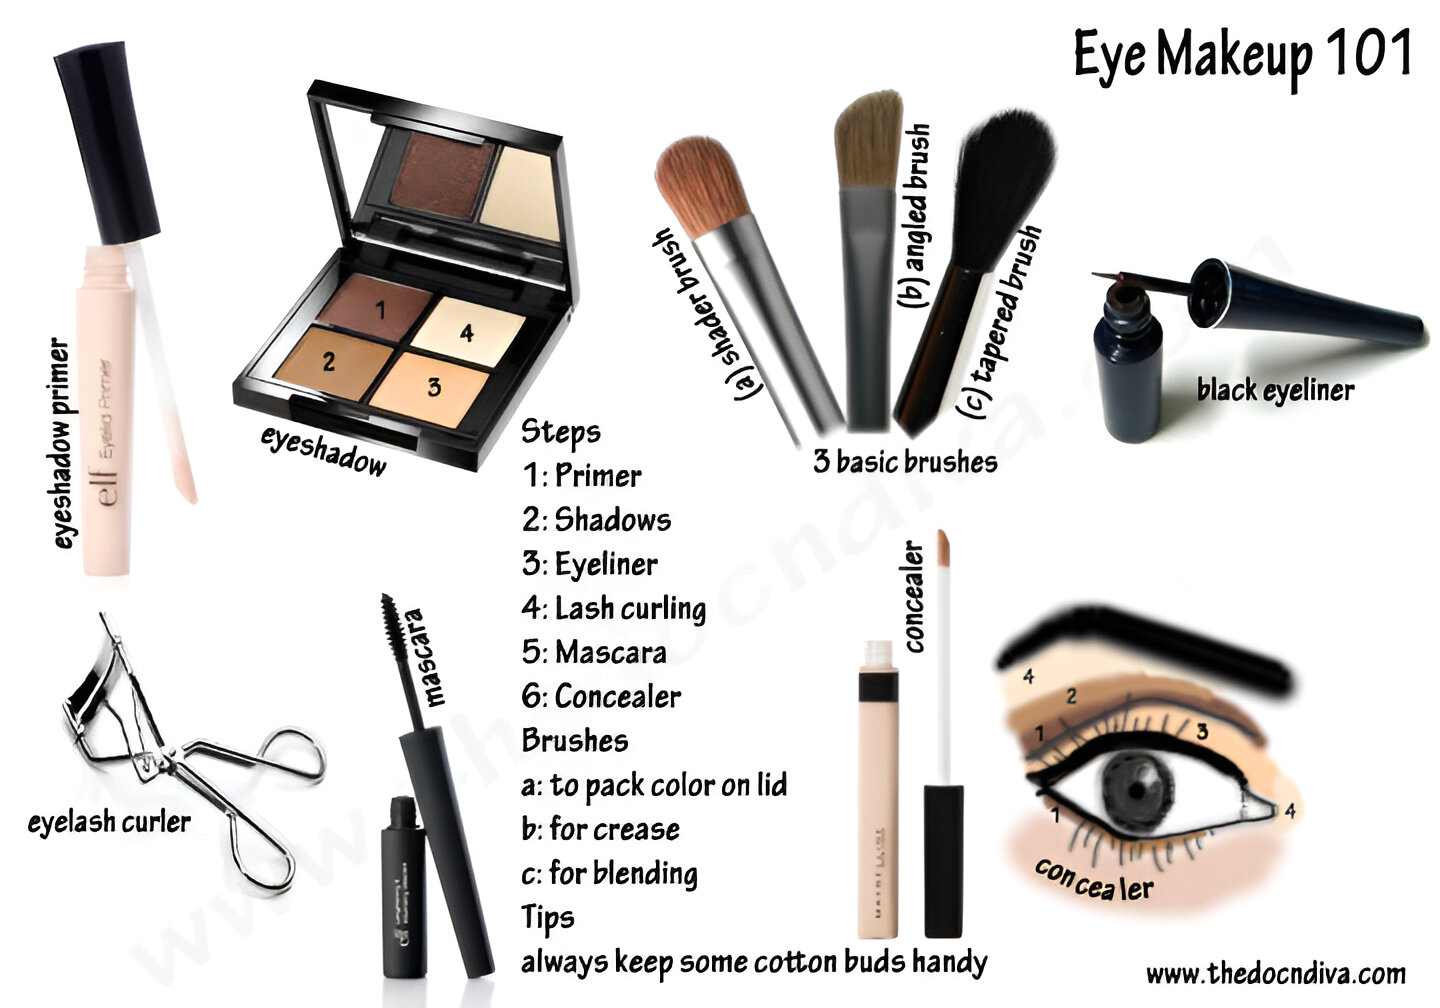 What You’ll Need To Apply Eyeshadow Like A Pro